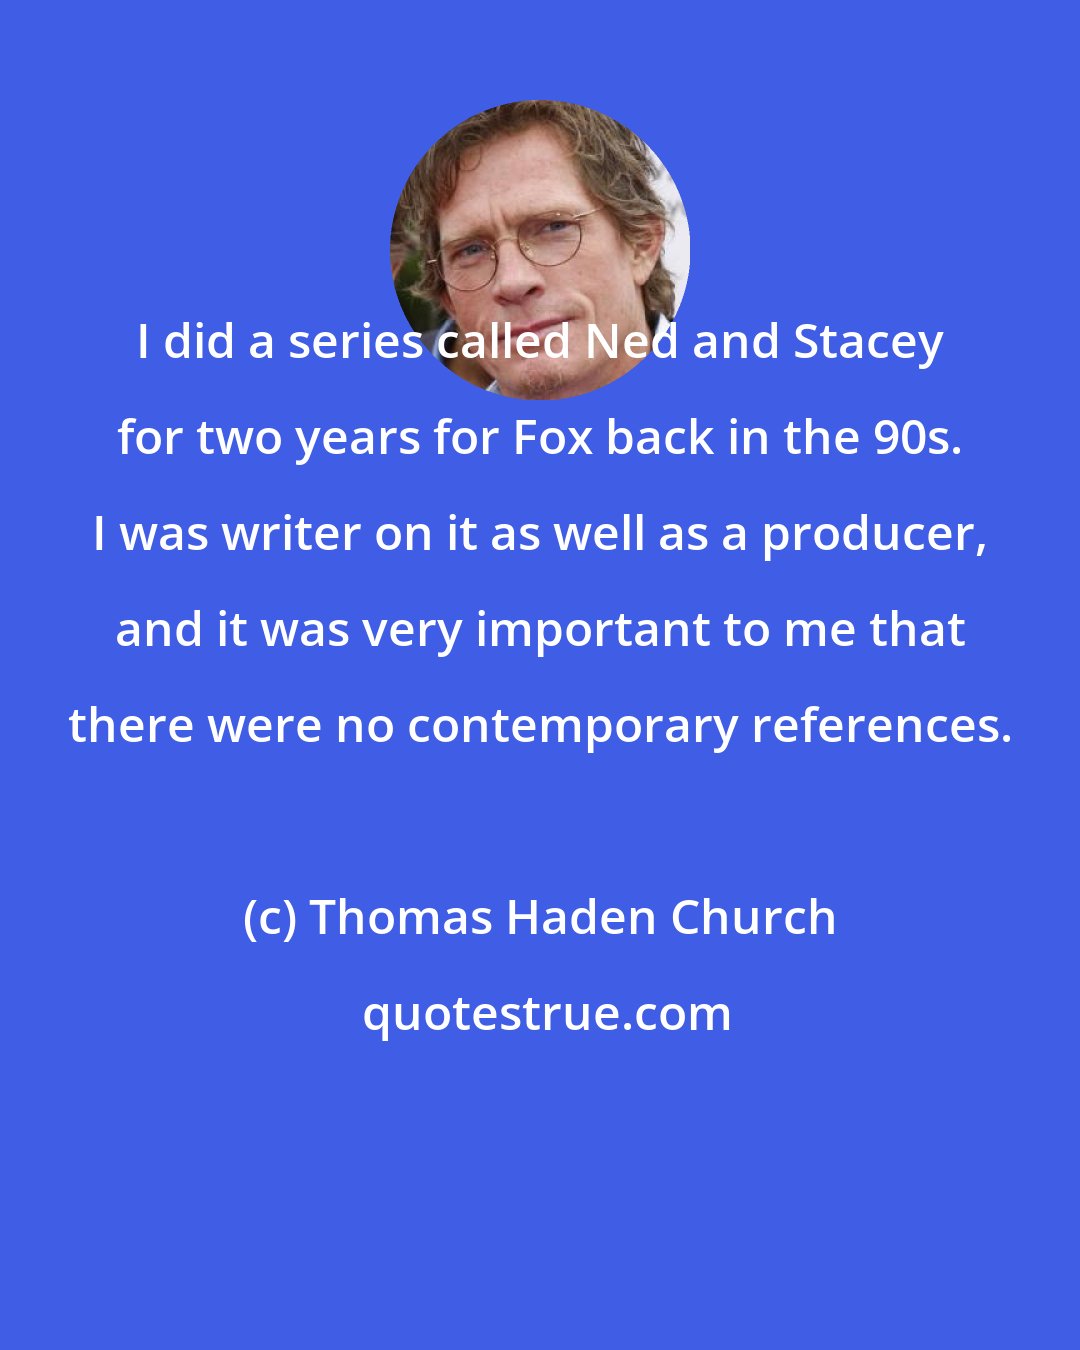 Thomas Haden Church: I did a series called Ned and Stacey for two years for Fox back in the 90s. I was writer on it as well as a producer, and it was very important to me that there were no contemporary references.